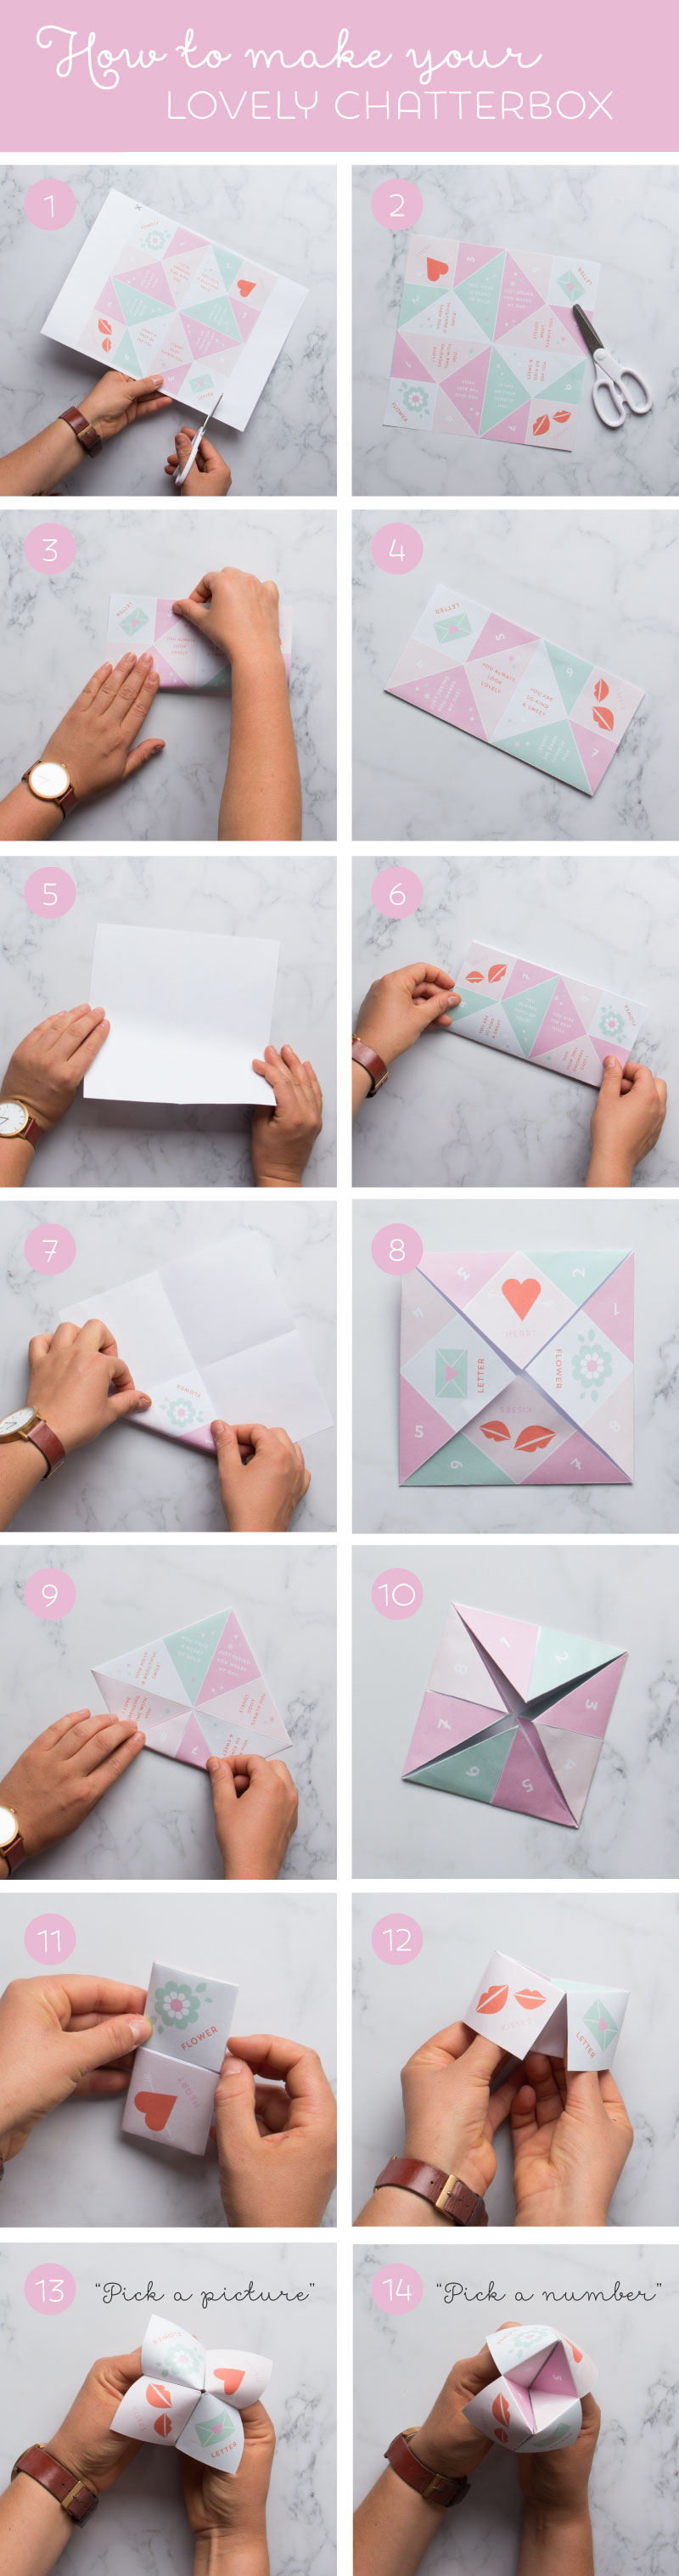 Free Lovely Chatterbox Valentines Day Printables ~ Tinyme